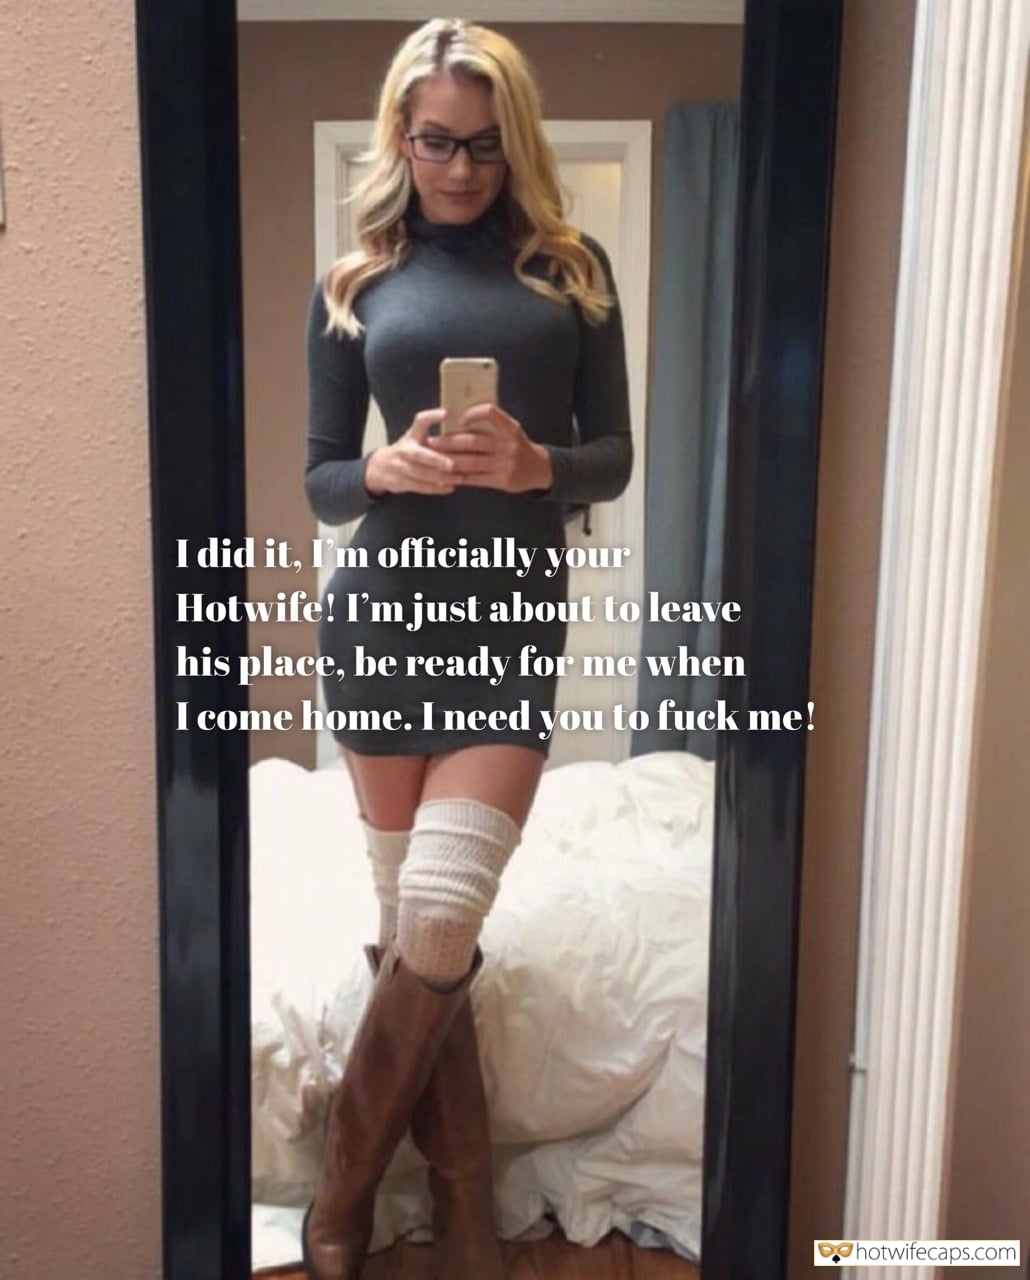 My Favorite hotwife caption: I did it, I’m officially your Hotwife! I’m just about to leave his place, be ready for me when I come home. I need you to fuck me! wife comes home with cum in her pussy captions Come With the...